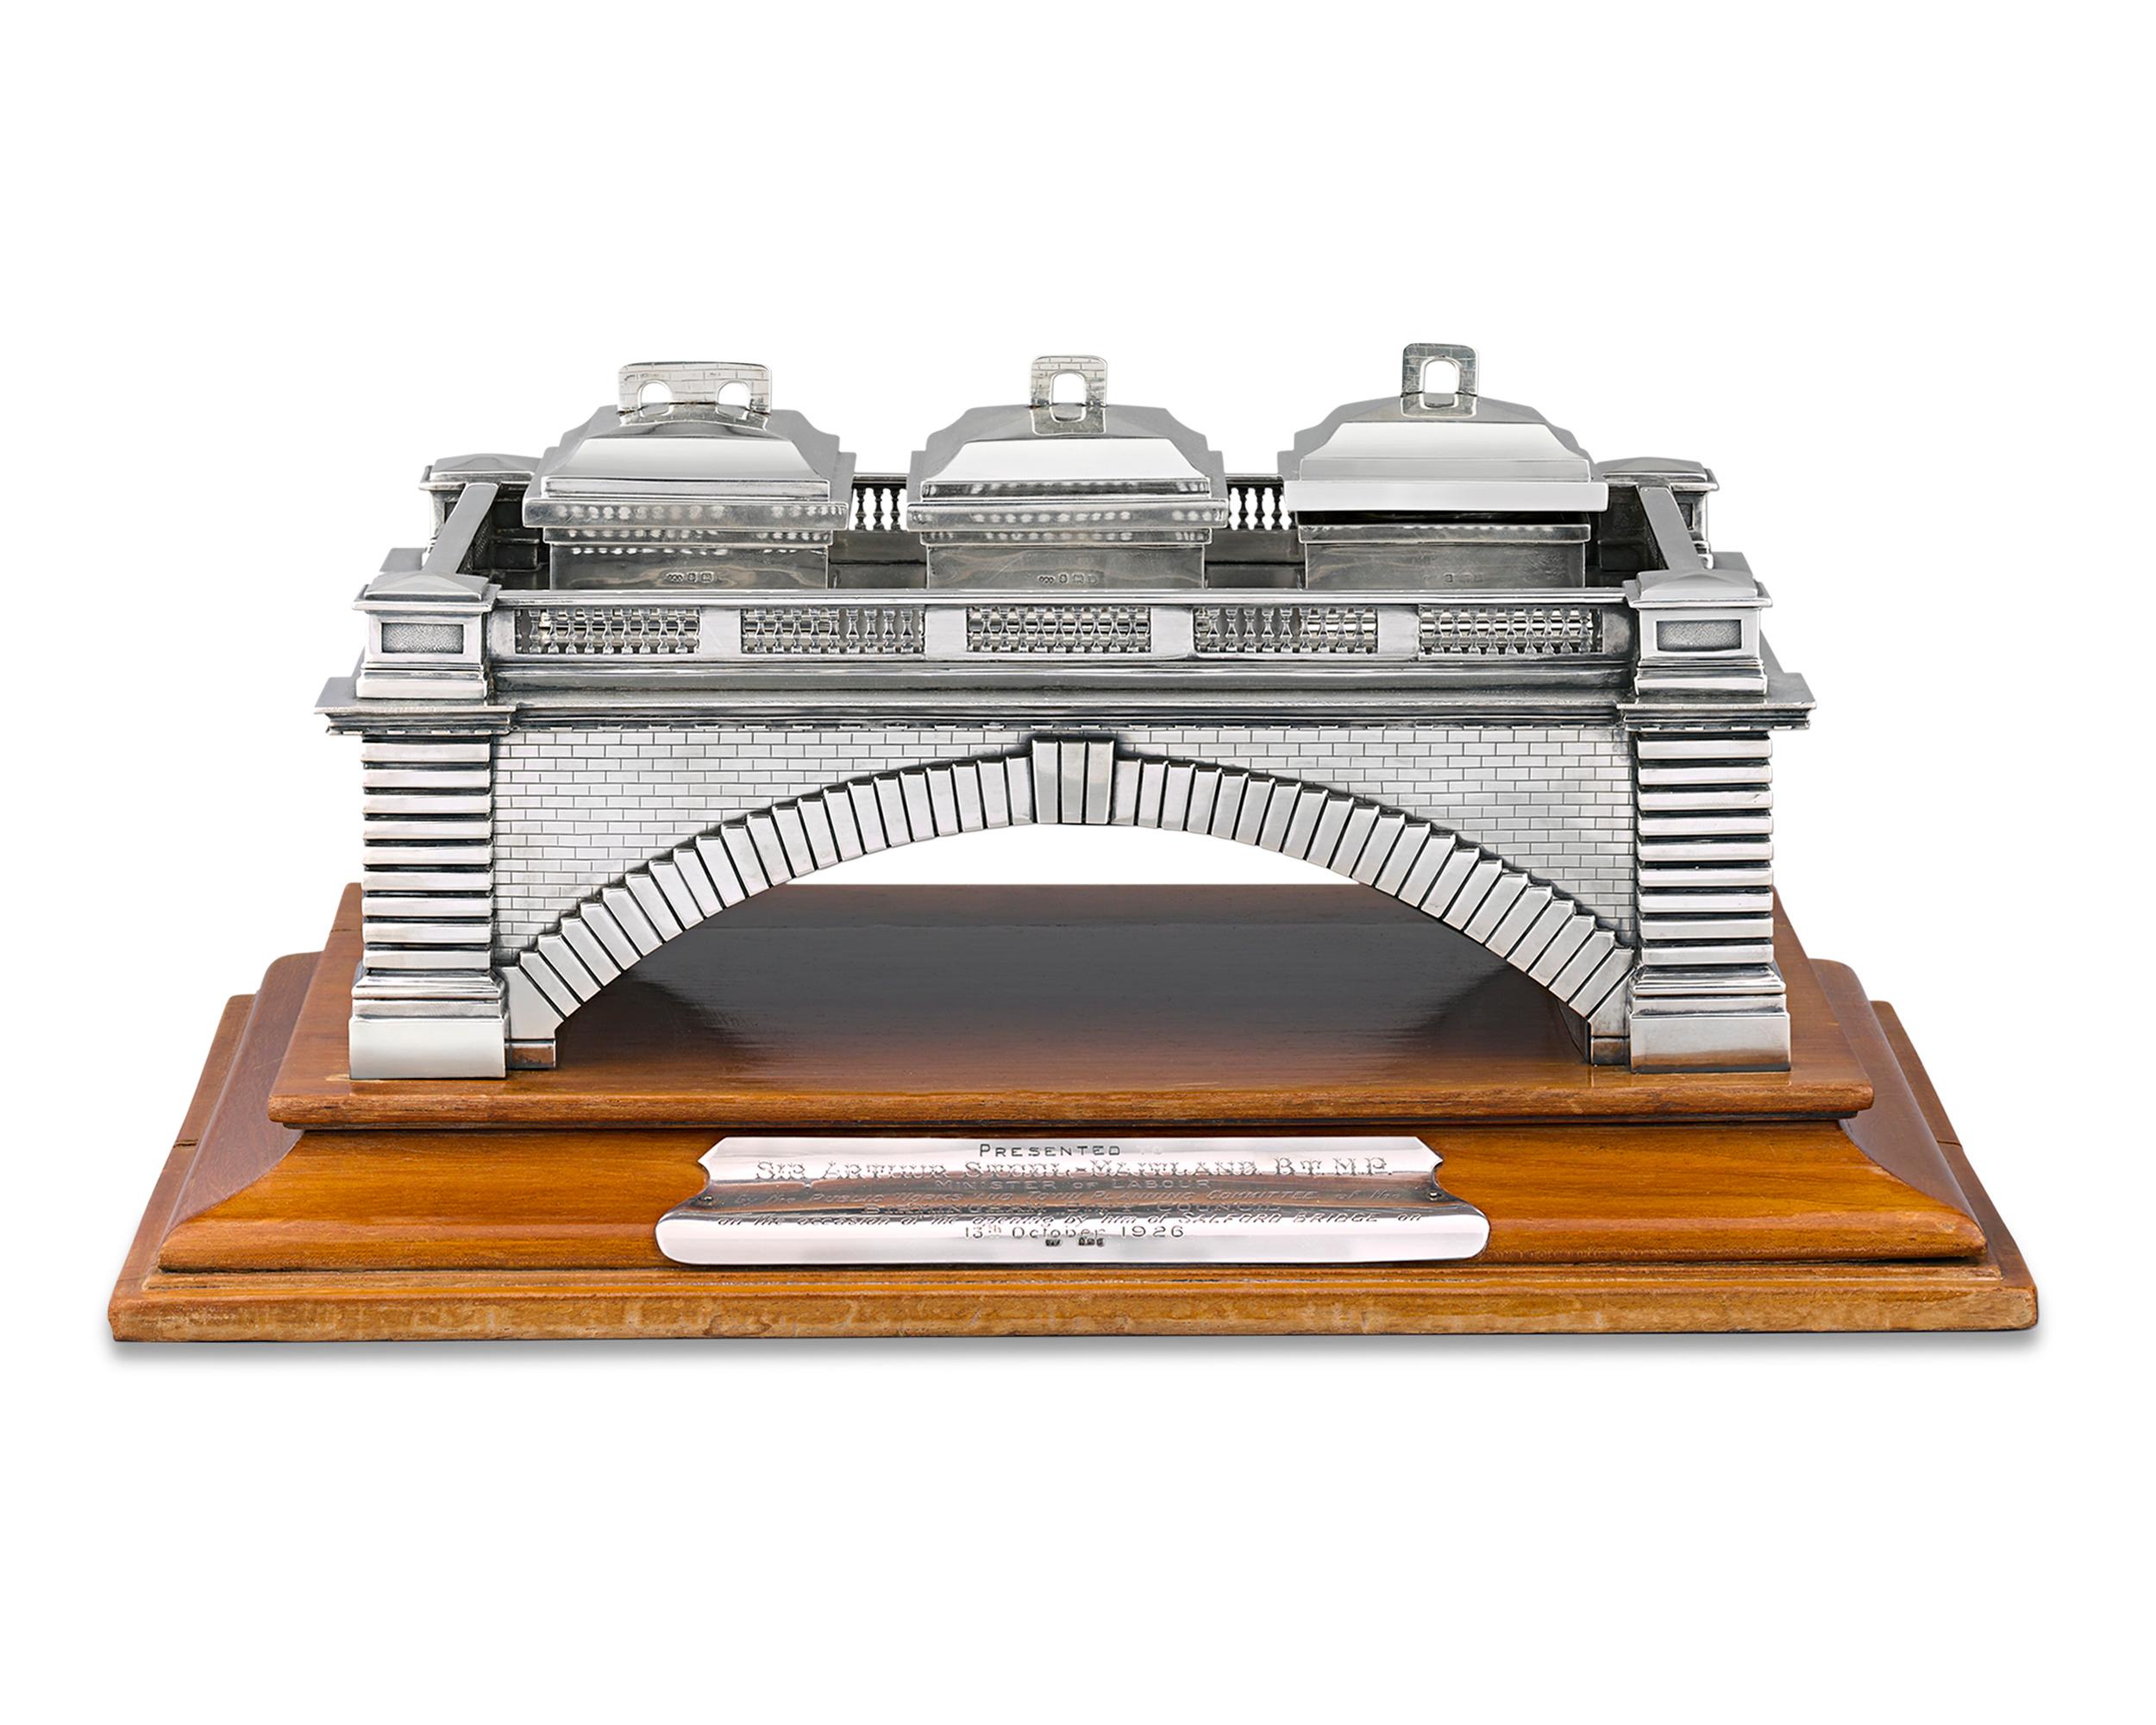 This superlative silver inkwell was presented to Sir Arthur Steel-Maitland, the United Kingdom’s Minister of Labour, on the occasion of the opening of the Salford Bridge in Birmingham. The charming inkstand was designed by the noted Birmingham firm